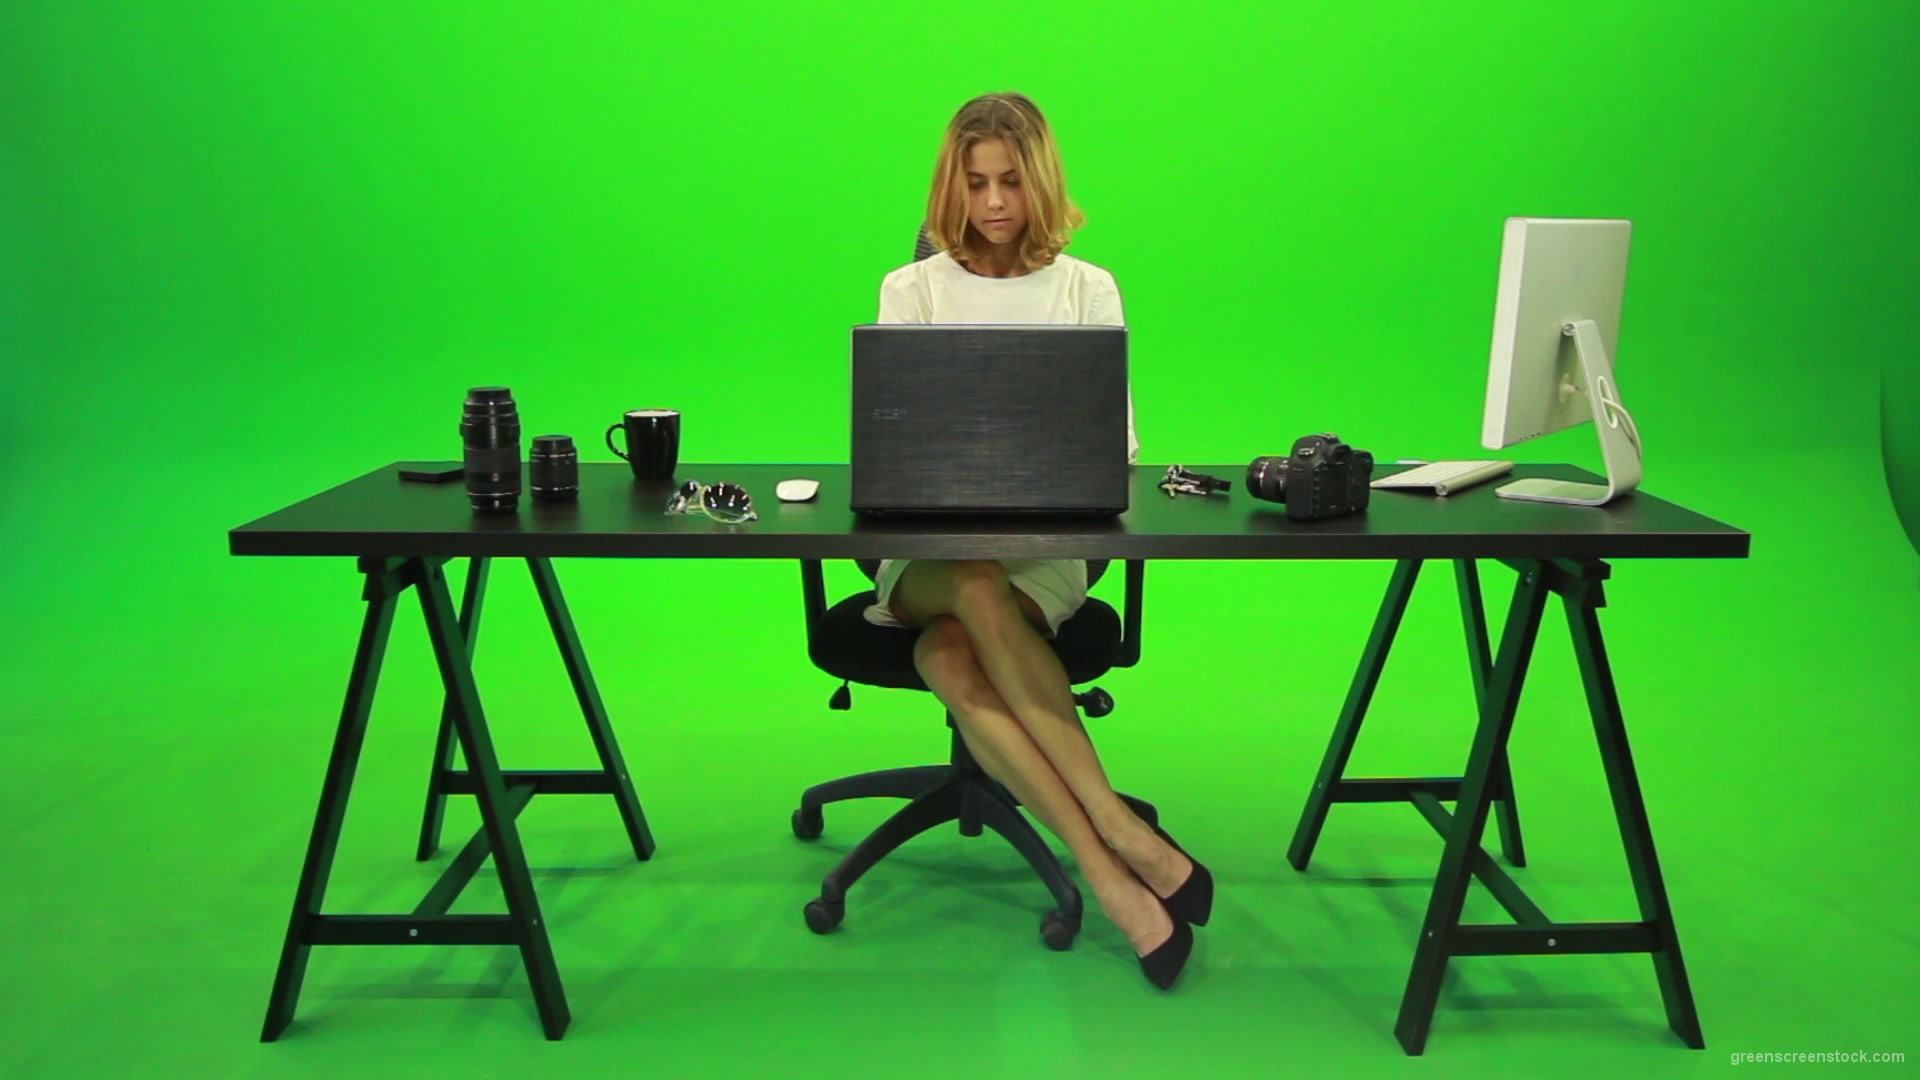 Business-Woman-Working-in-the-Office-2-Green-Screen-Footage_009 Green Screen Stock